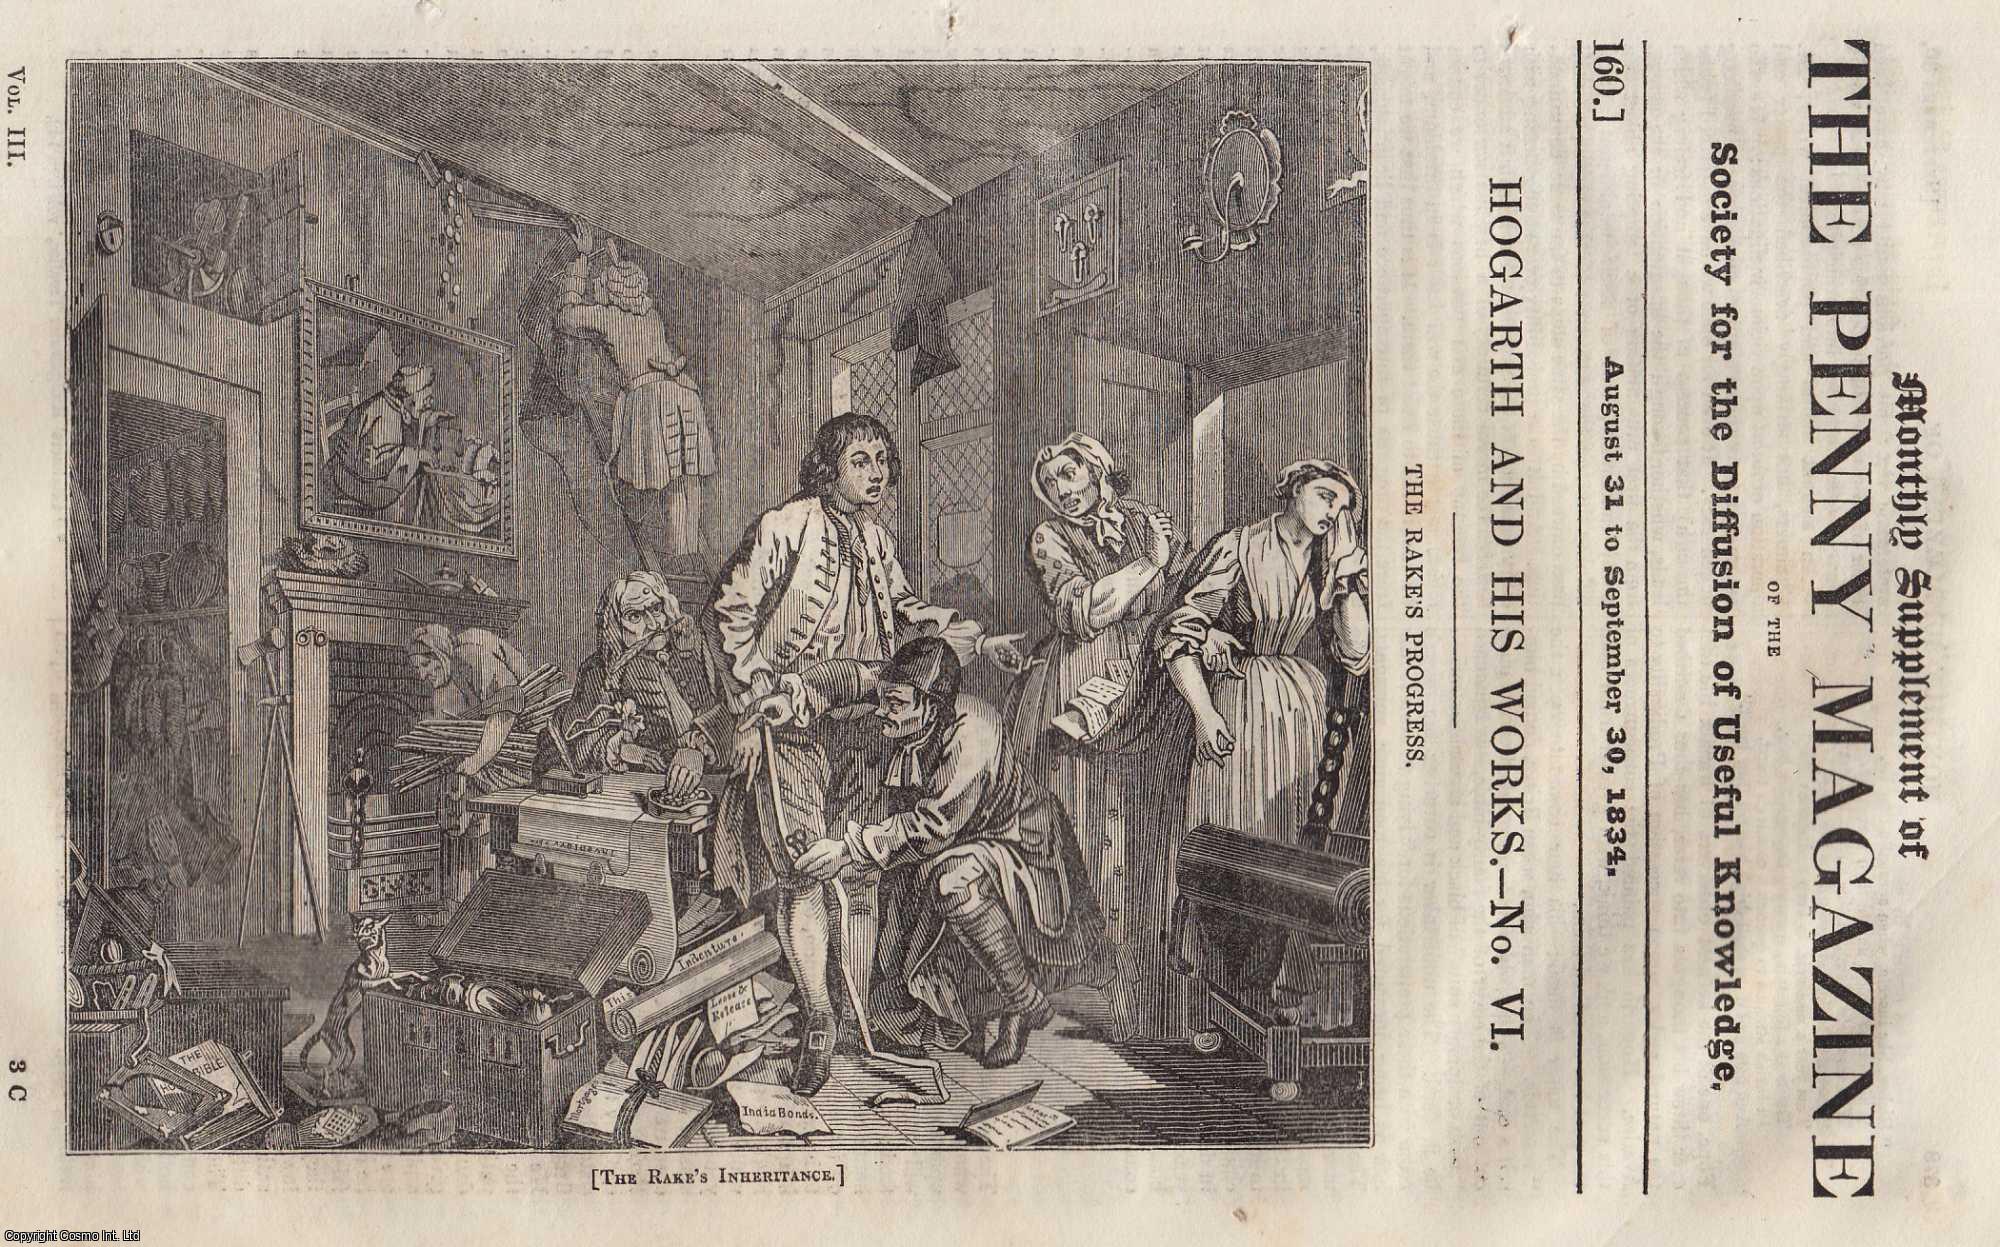 Penny Magazine - William Hogarth (6) and His Works (artist). Issue No. 160, August 31st to September 30th, 1834. A complete original weekly issue of the Penny Magazine, 1834.